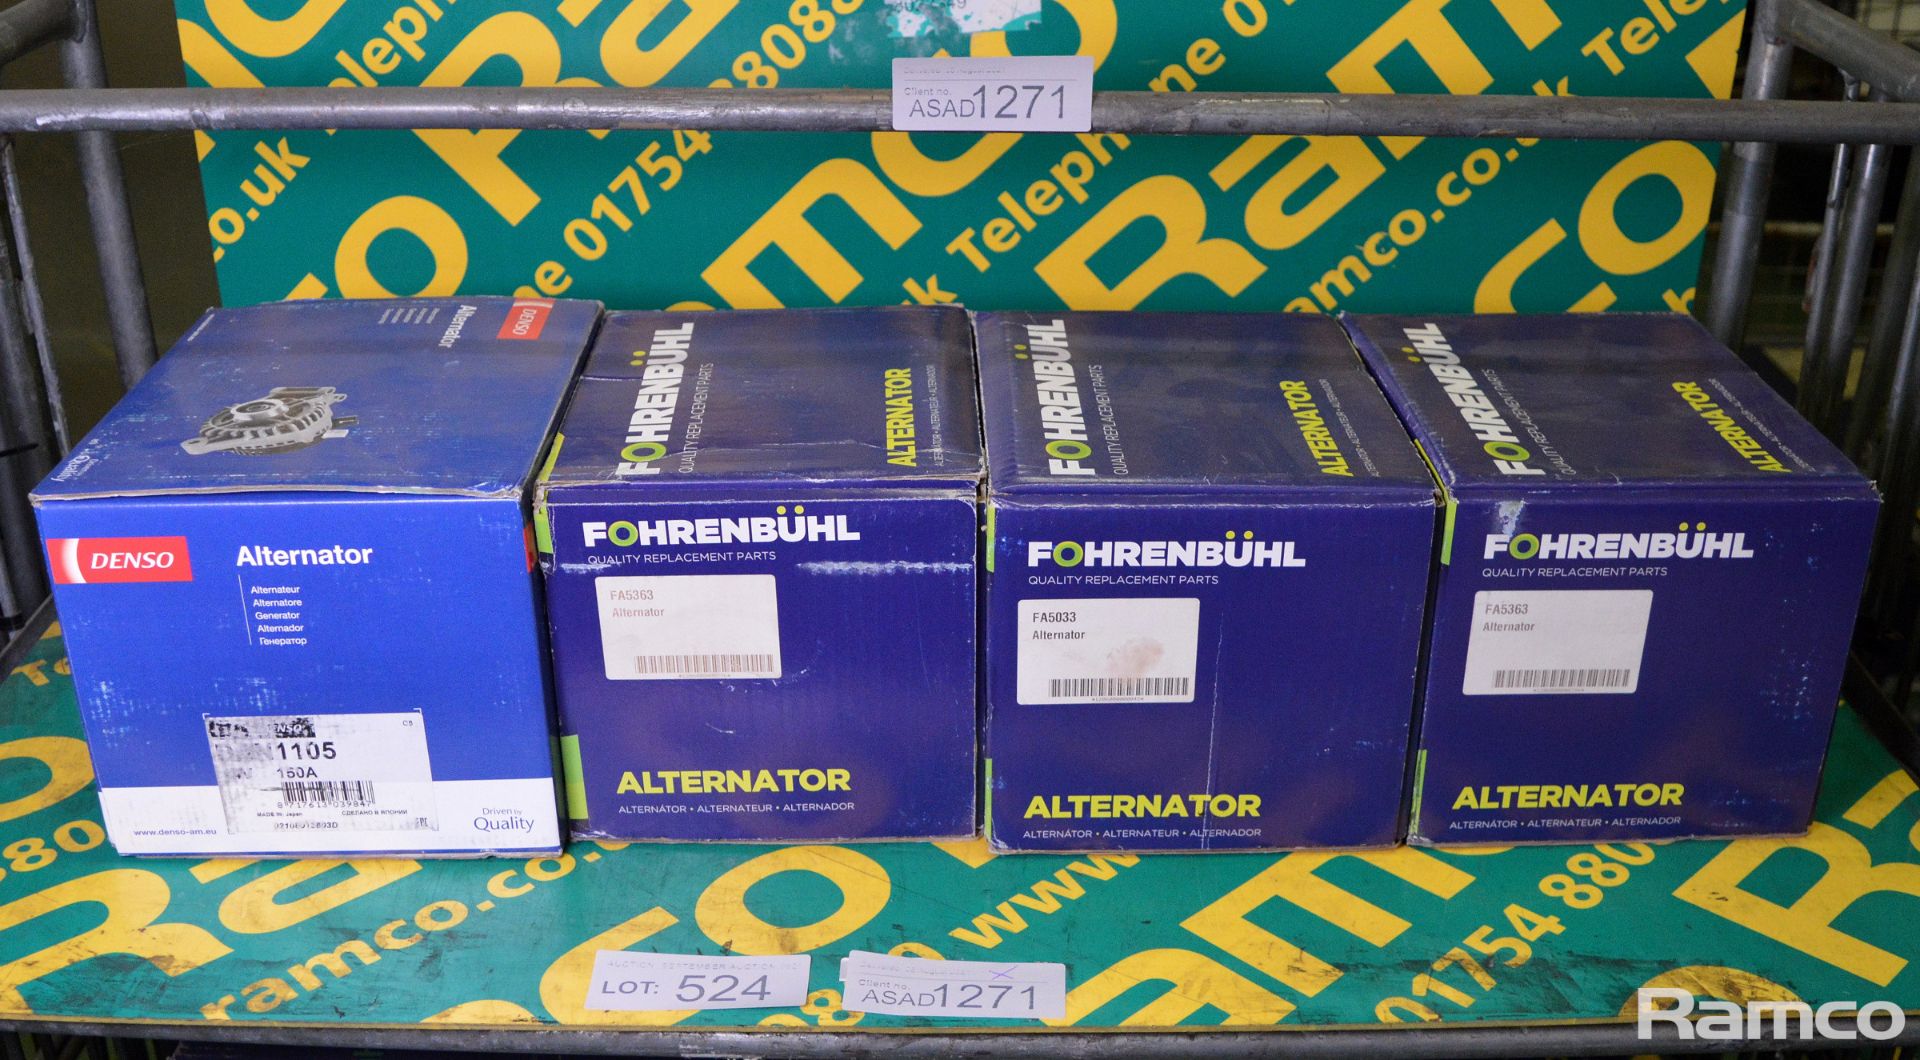 4x Alternators - 1x Denso & 3x Fohrenbuhl - please check pictures for models